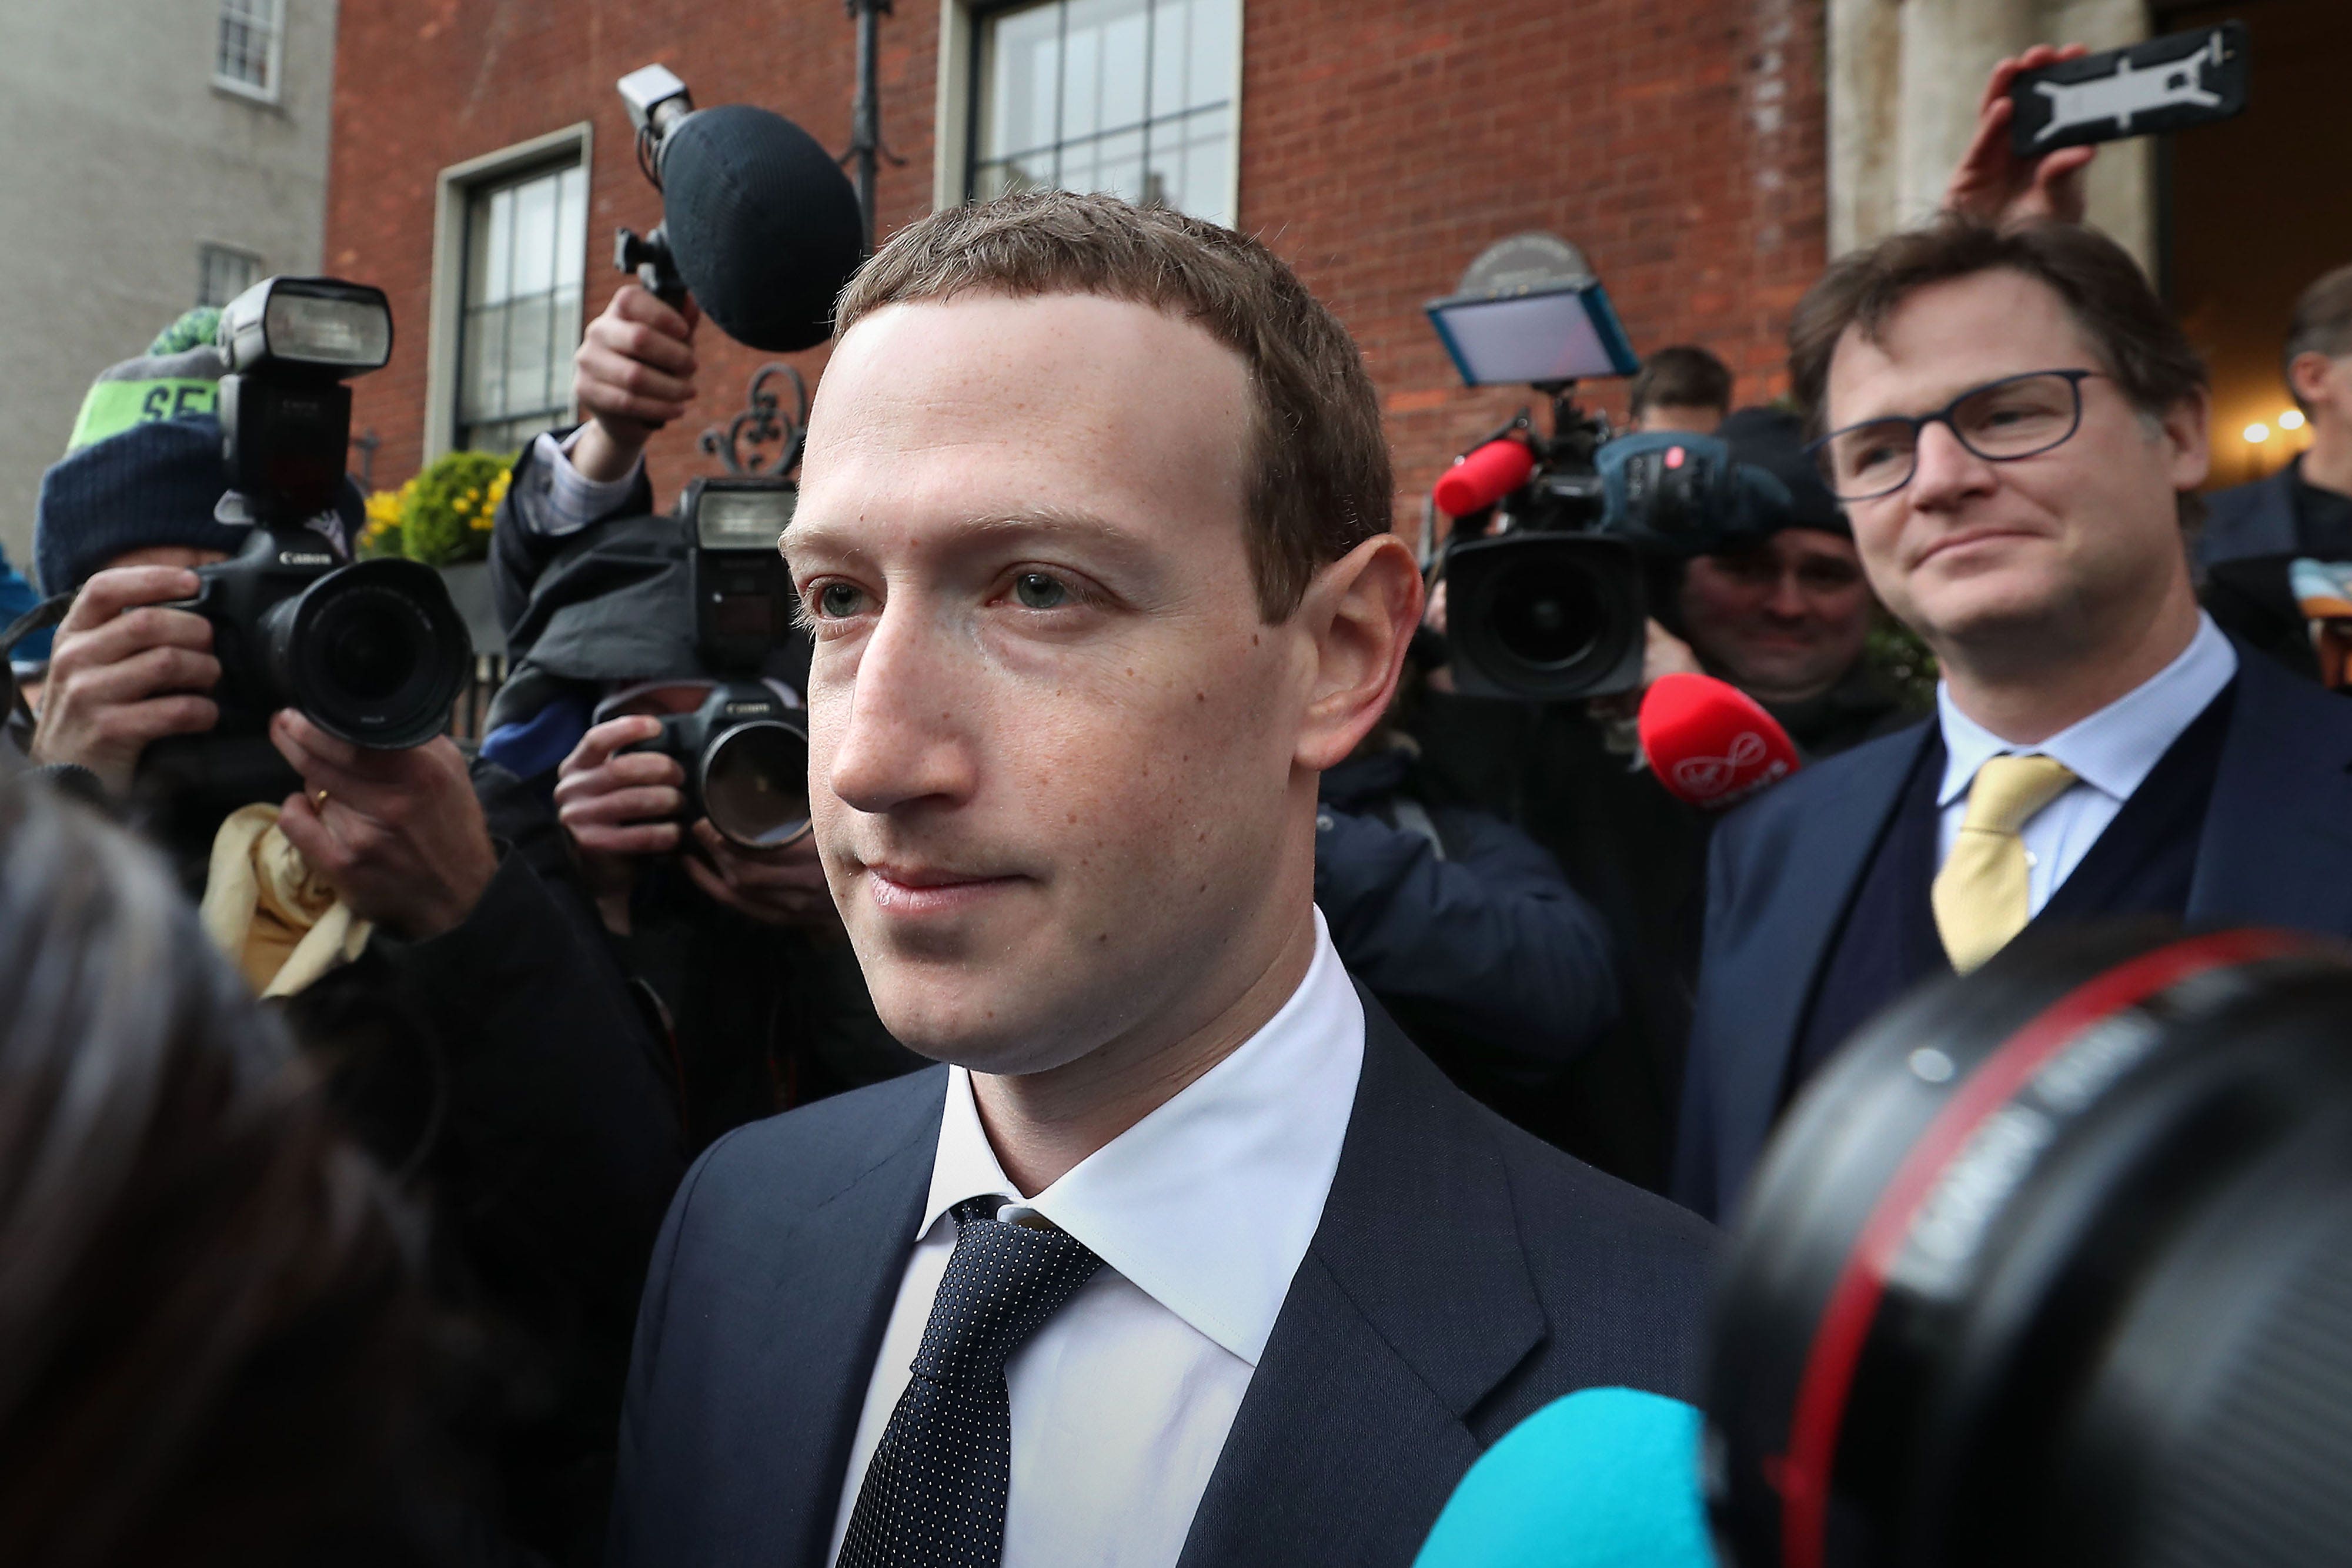 Facebook CEO Mark Zuckerberg leaving The Merrion Hotel in Dublin with Nick Clegg (right) after a meeting with politicians to discuss regulation of social media and harmful content (Niall Carson/PA)